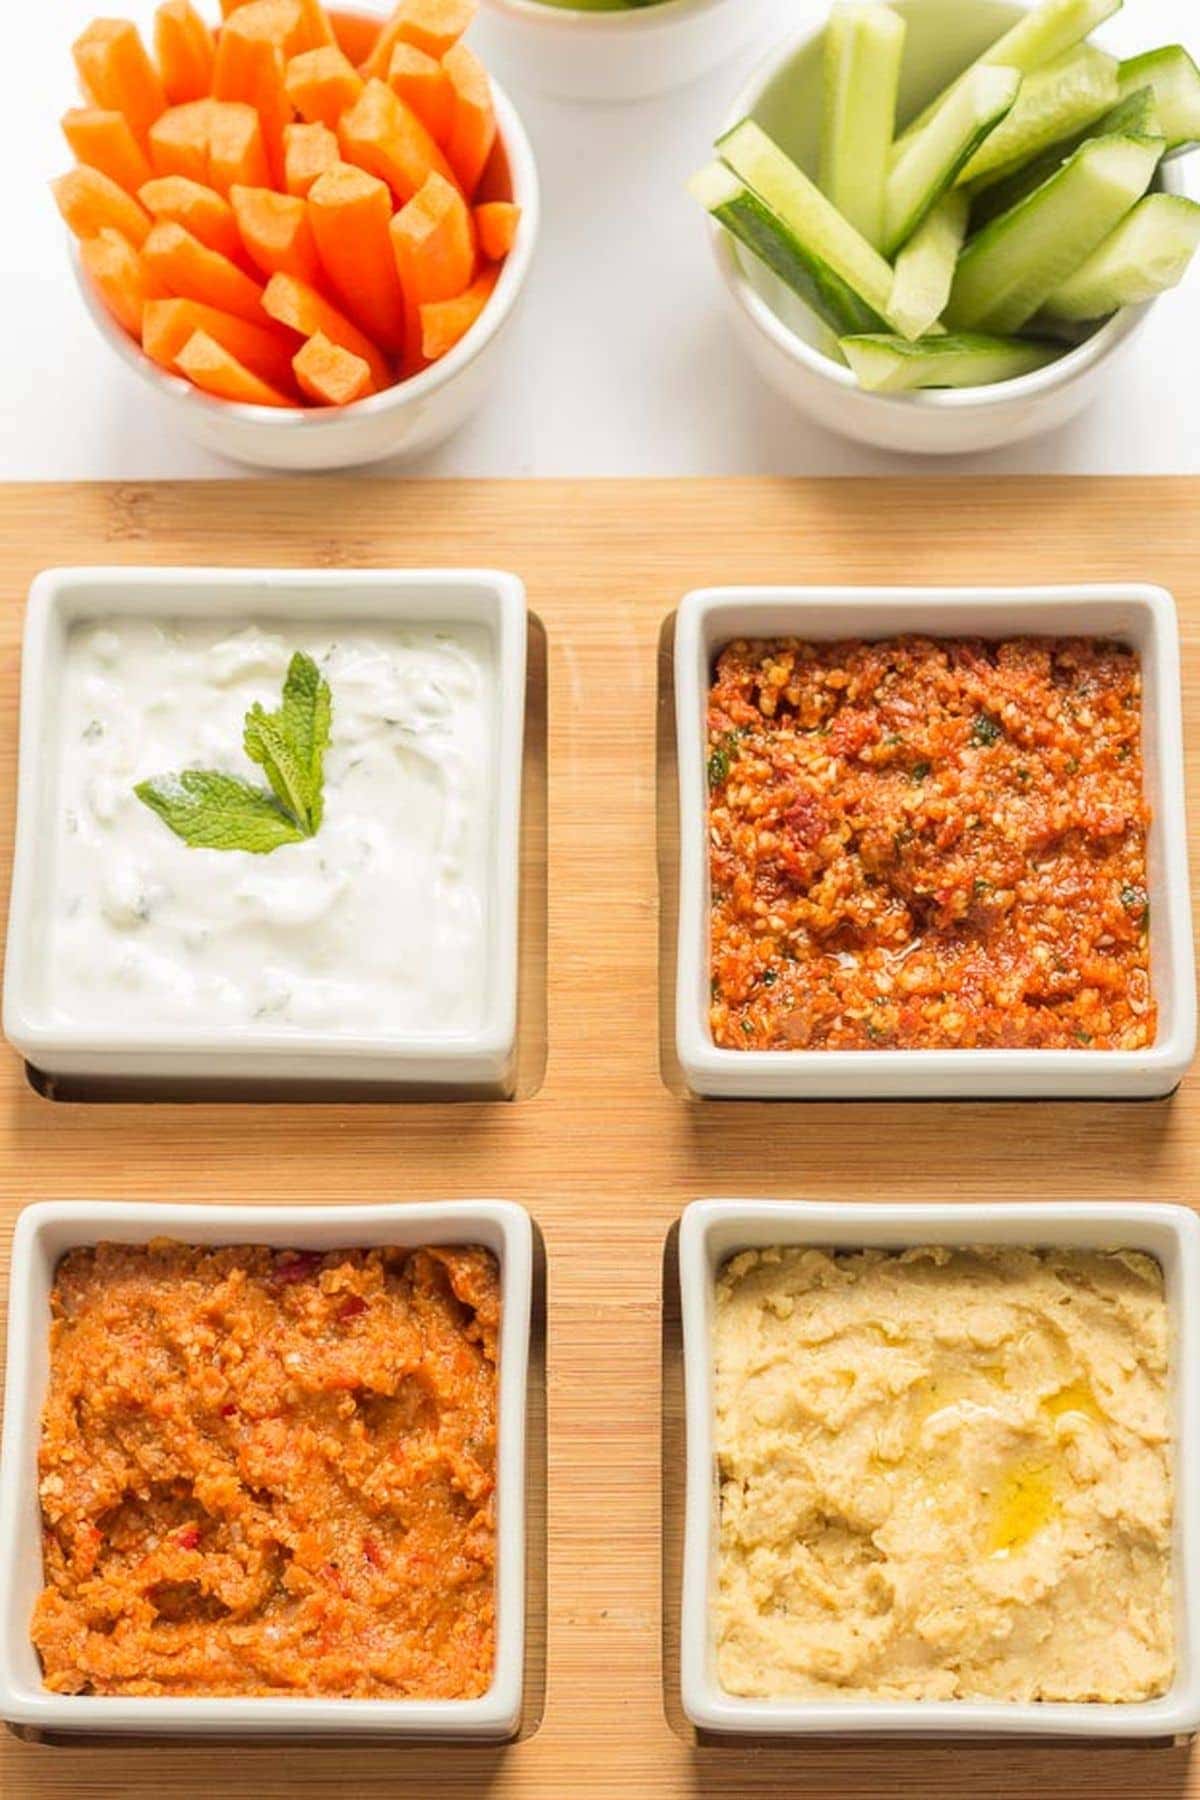 Birds eye view of four dishes containing low fat healthy dips.